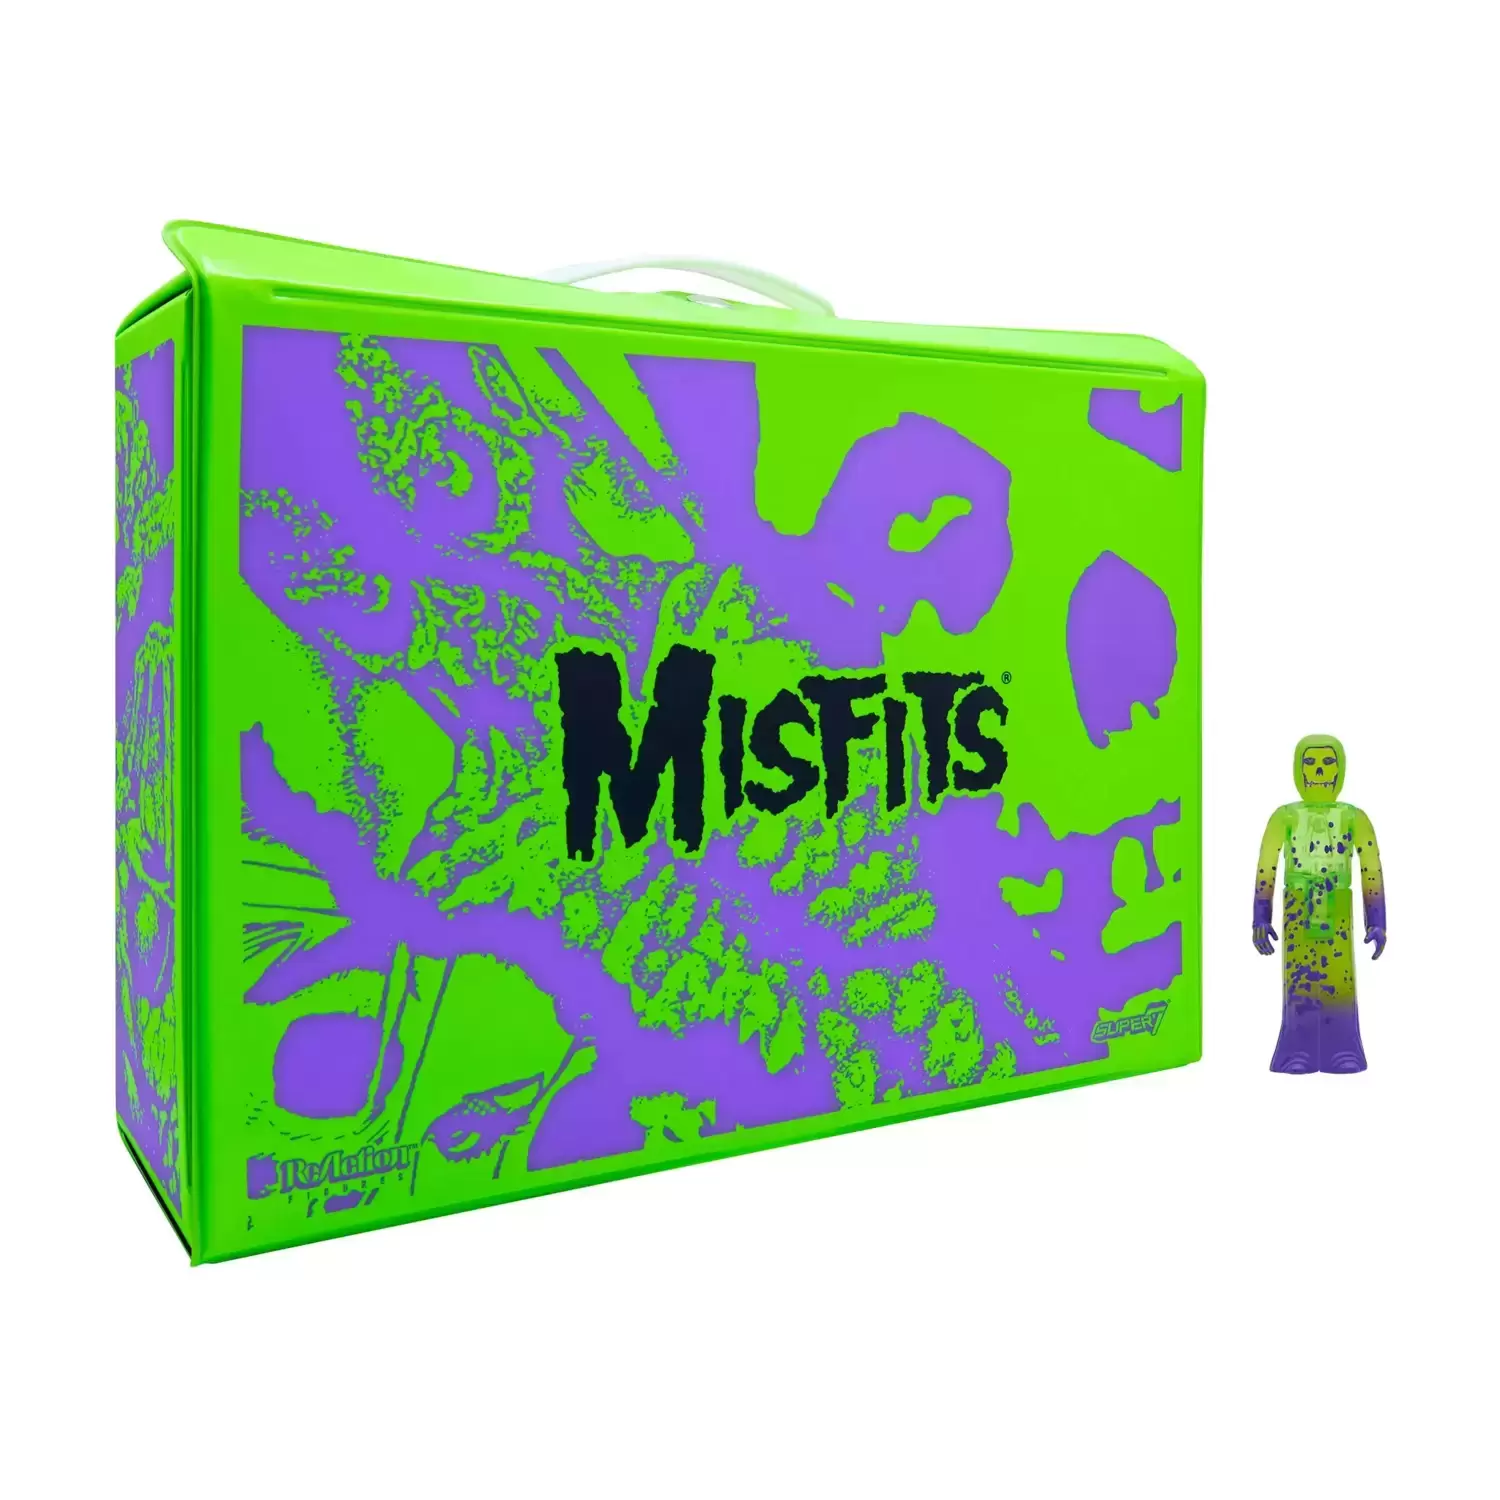 ReAction Figures - Misfits - Carry Case with Fiend (Neon Green Purple)